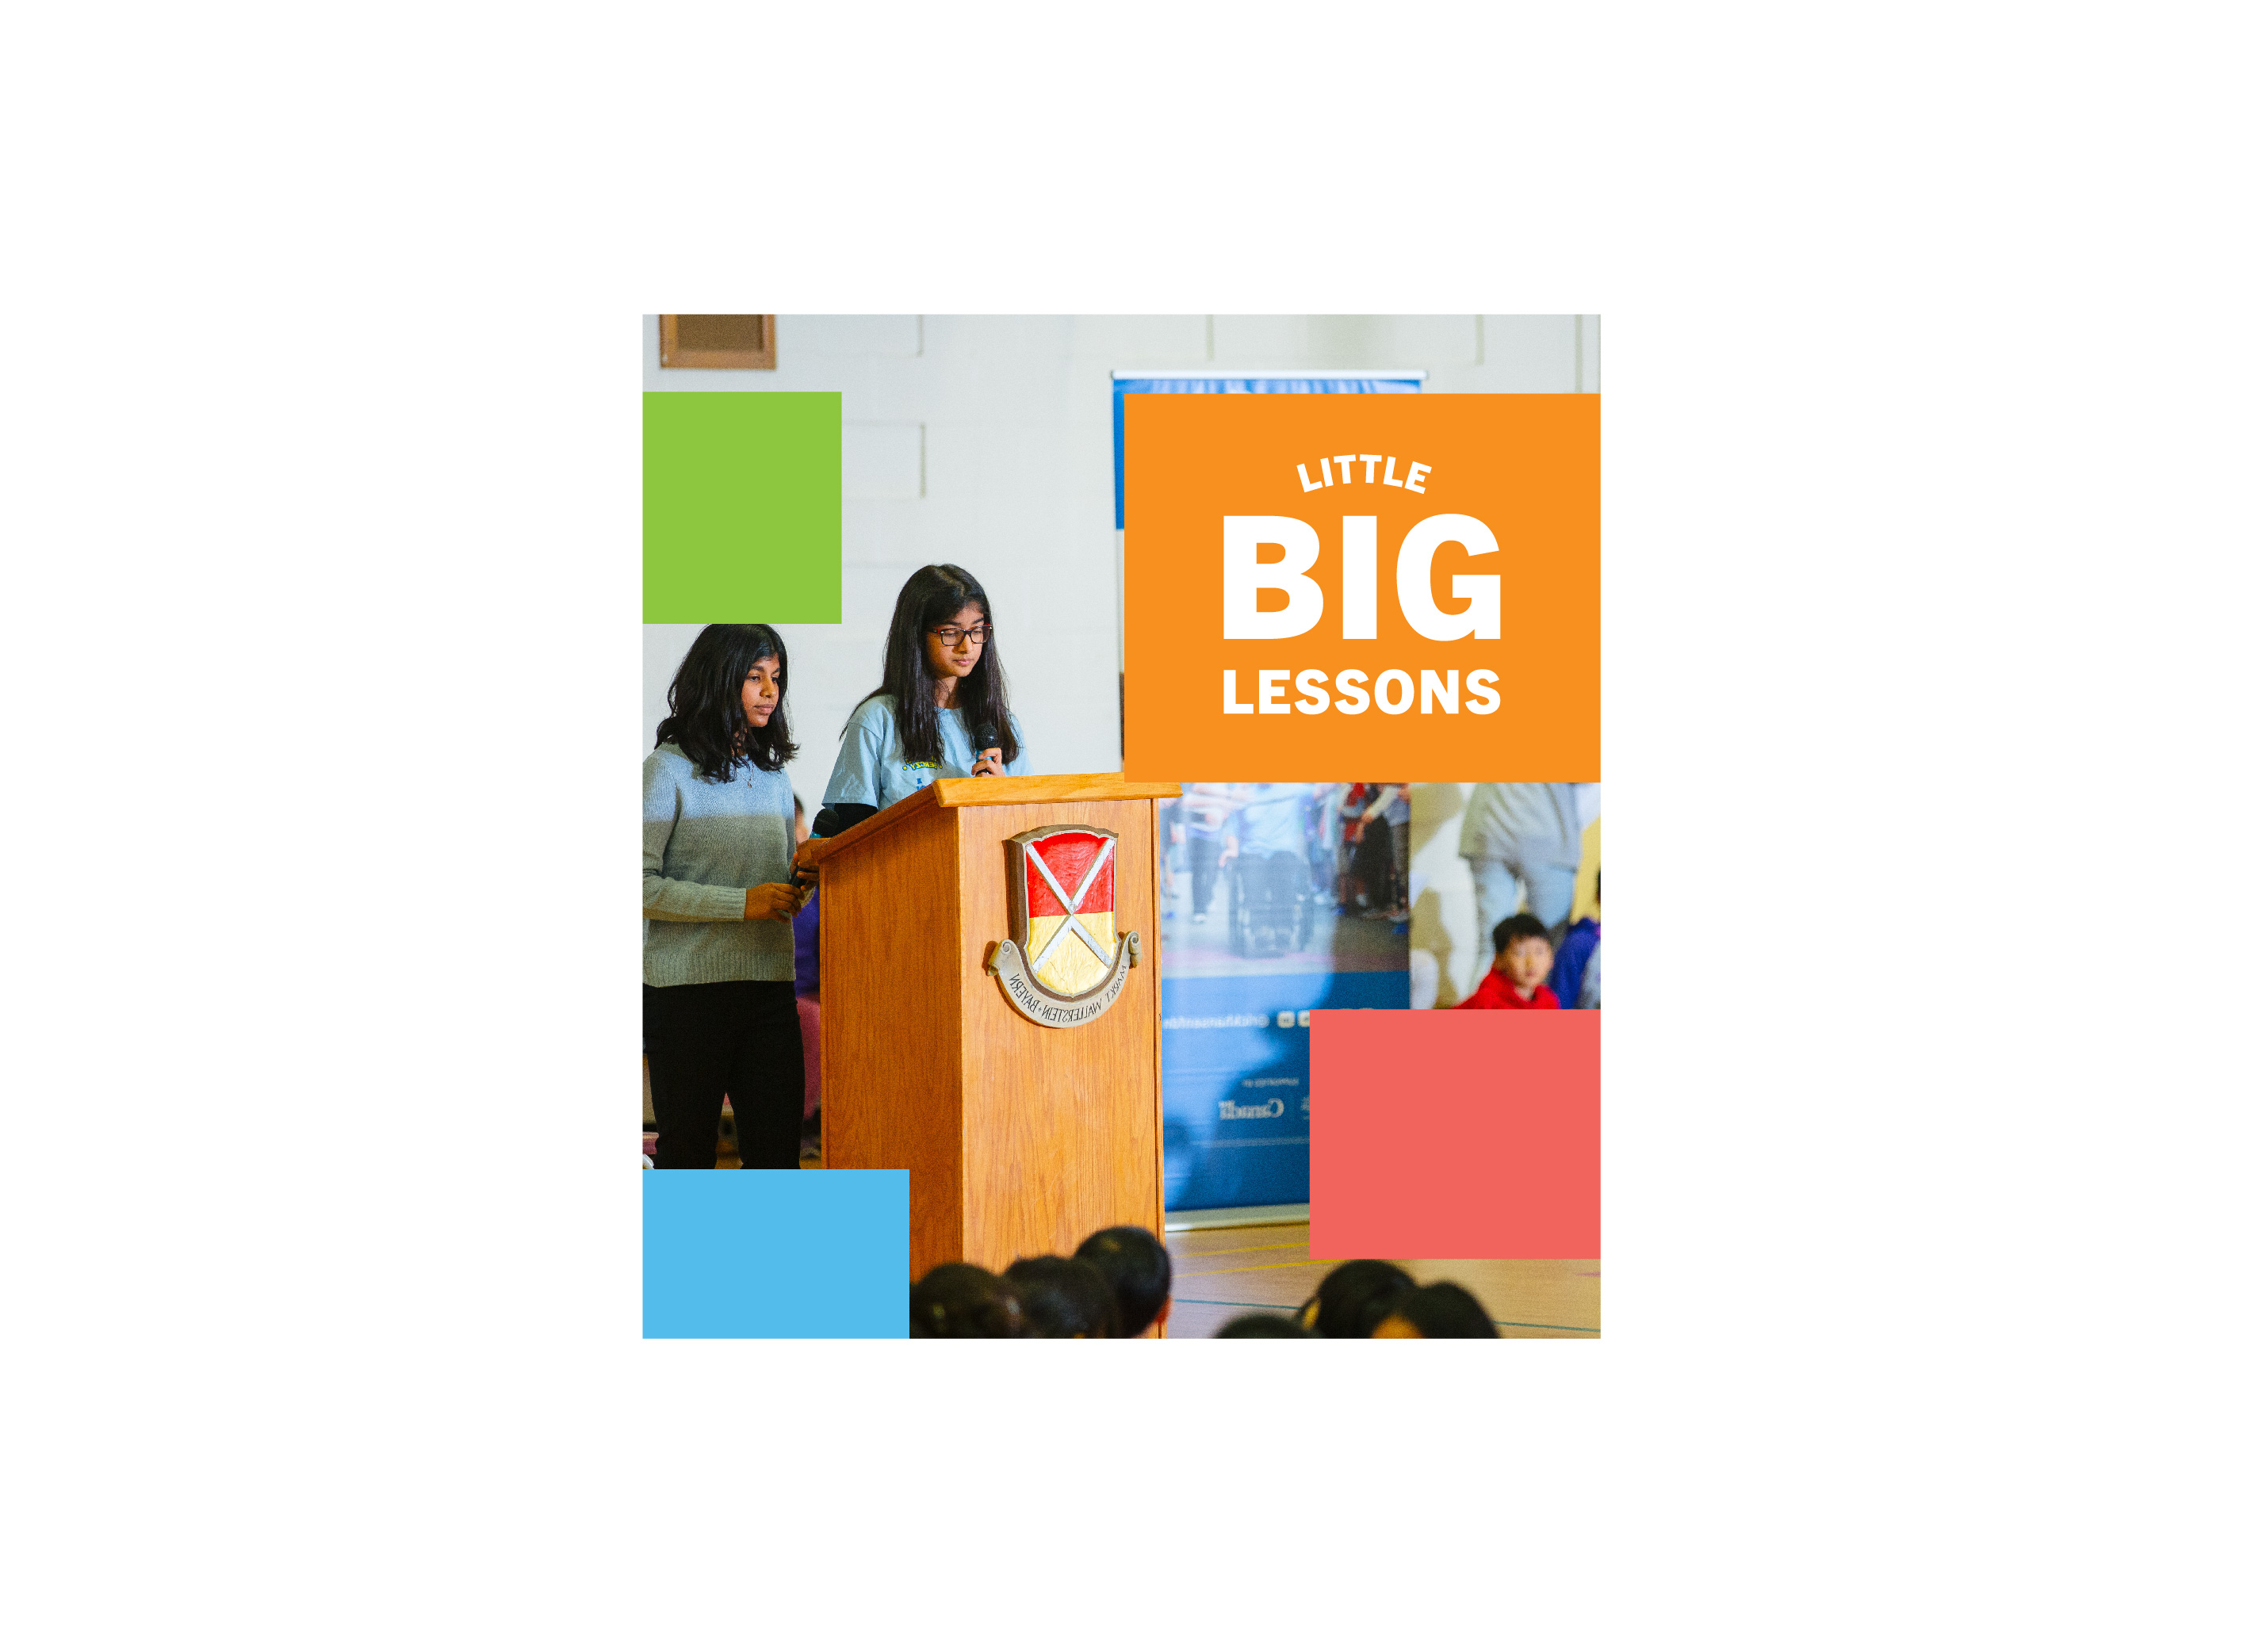 Two teenaged girls wearing a blue shirt are presenting at a wooden lectern to a group of kids. The title in front says Little Big Lessons.